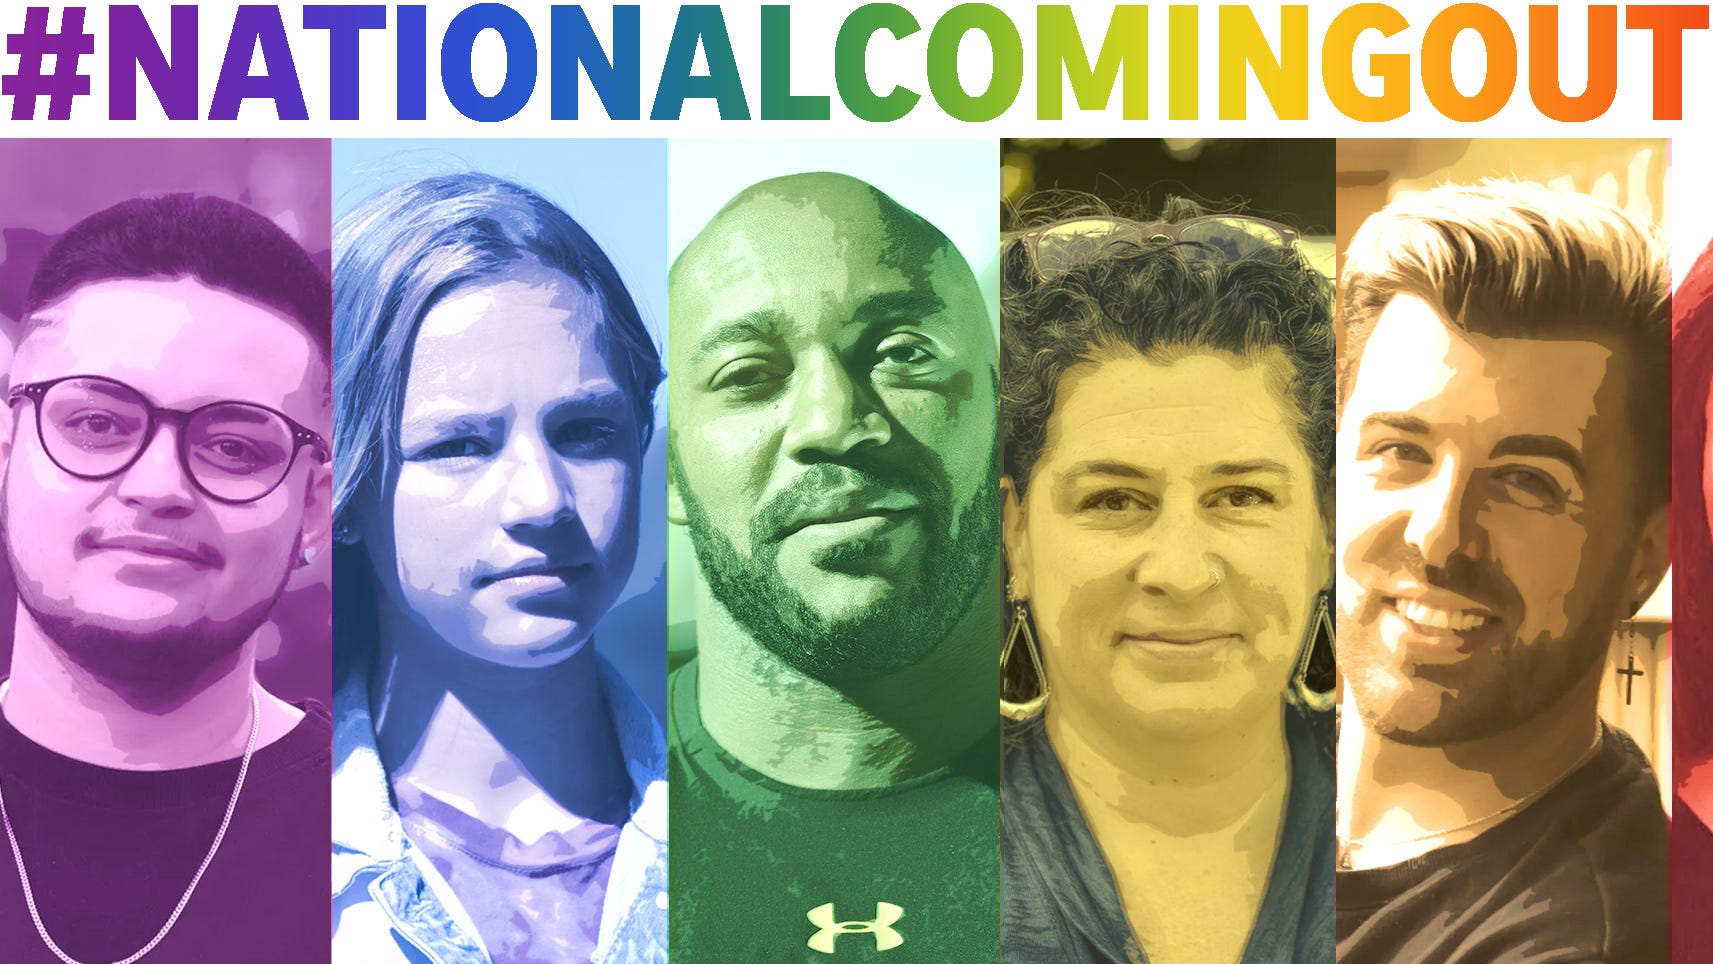 National Coming Out Day 2020 LGBTQ members share their stories